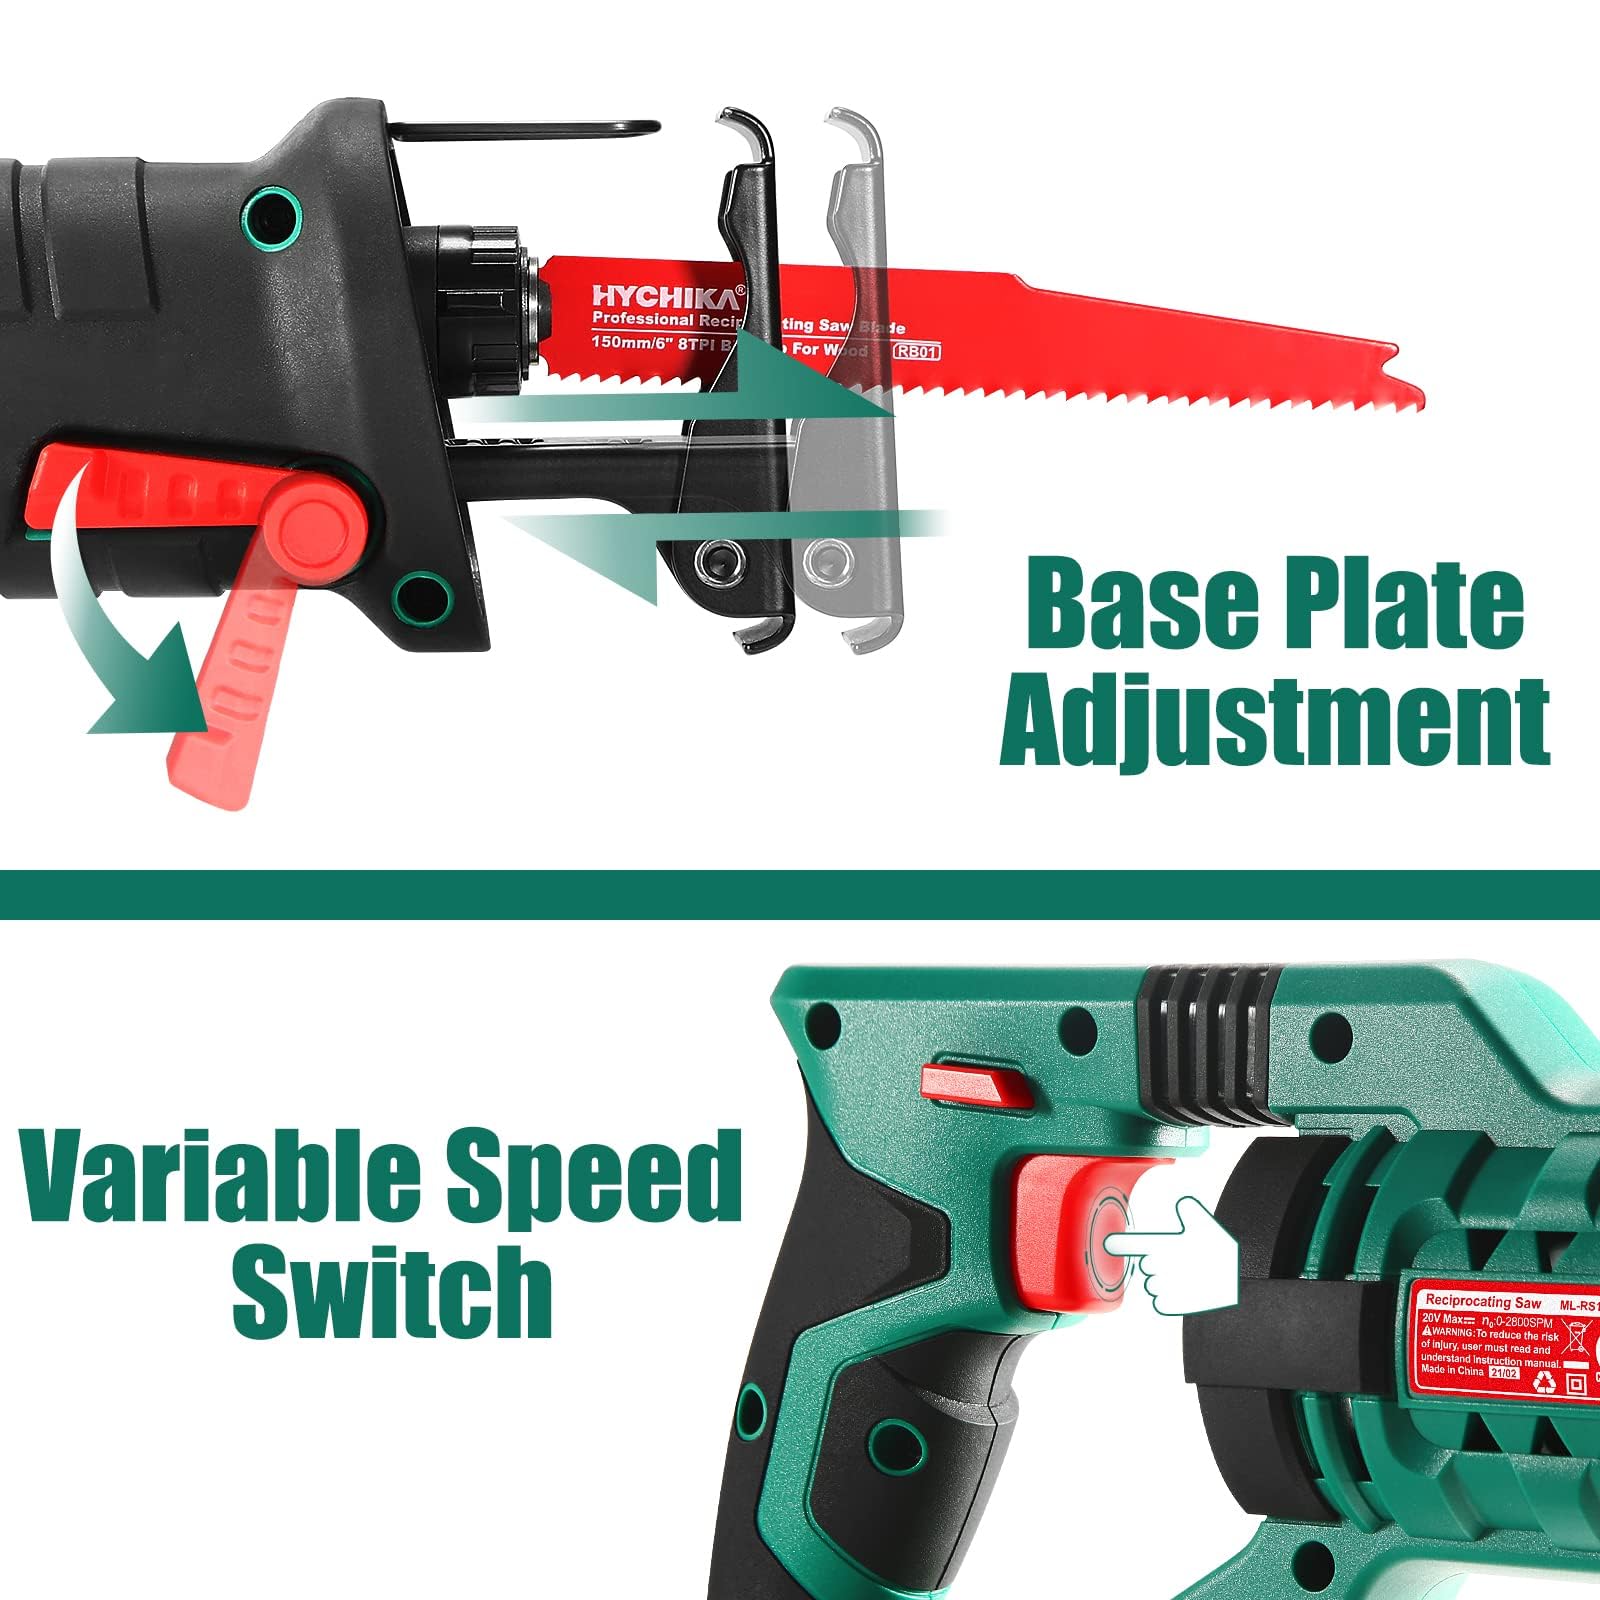 HYCHIKA Reciprocating Saw, 18V MAX Cordless Power Saw with 2.0Ah Battery, 2800SPM,7/8" Stroke Length, Variable Speed, Tool-Free Blade Change, 4 Saw Blades for Wood & Metal Cutting